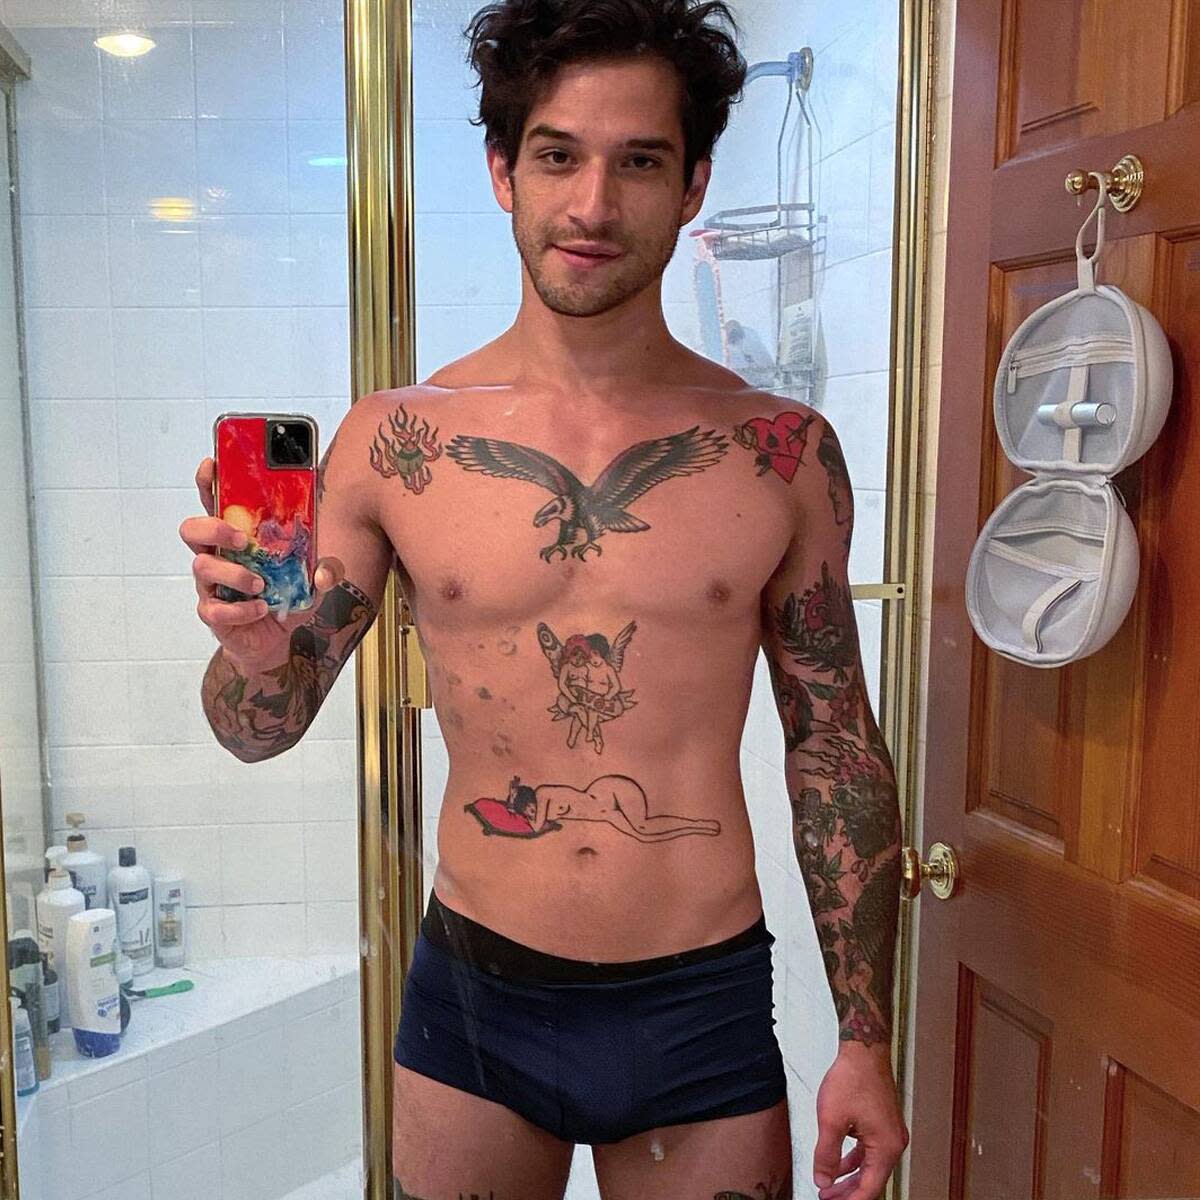 Why Tyler Posey Describes His Experience on OnlyFans as "Mentally Drai...